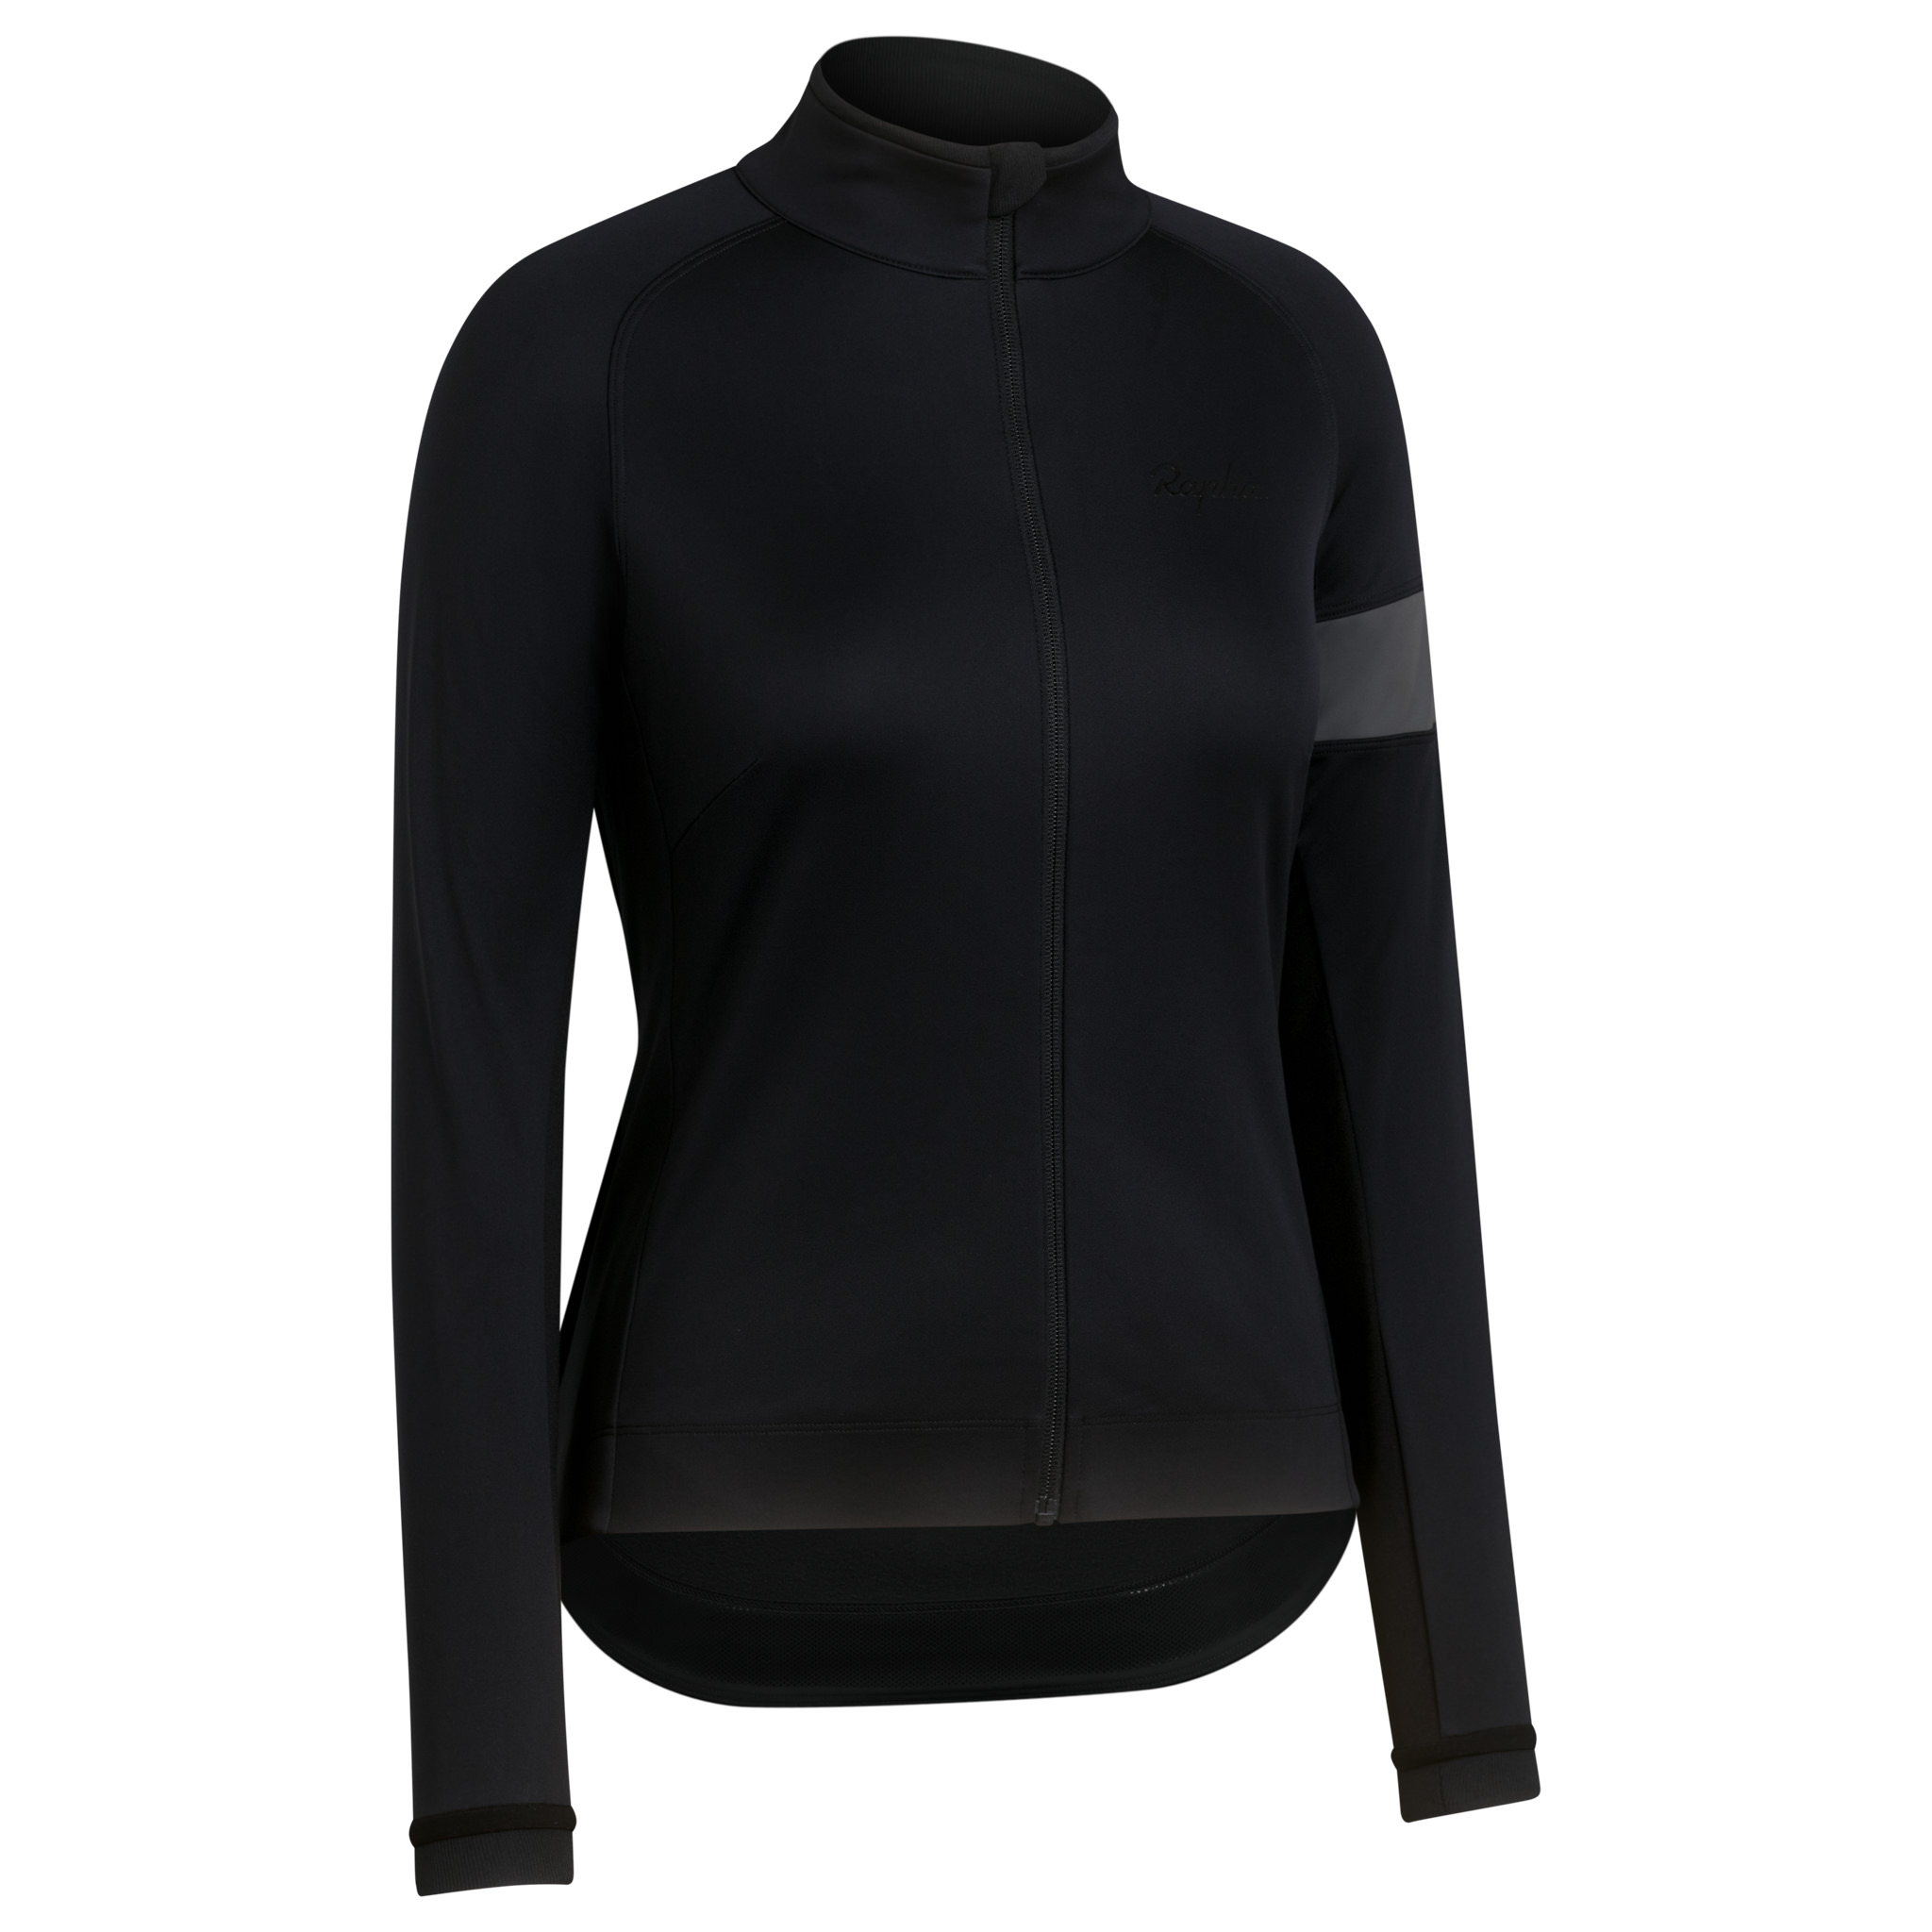 Women's Core Winter Cycling Jacket for Winter Riding